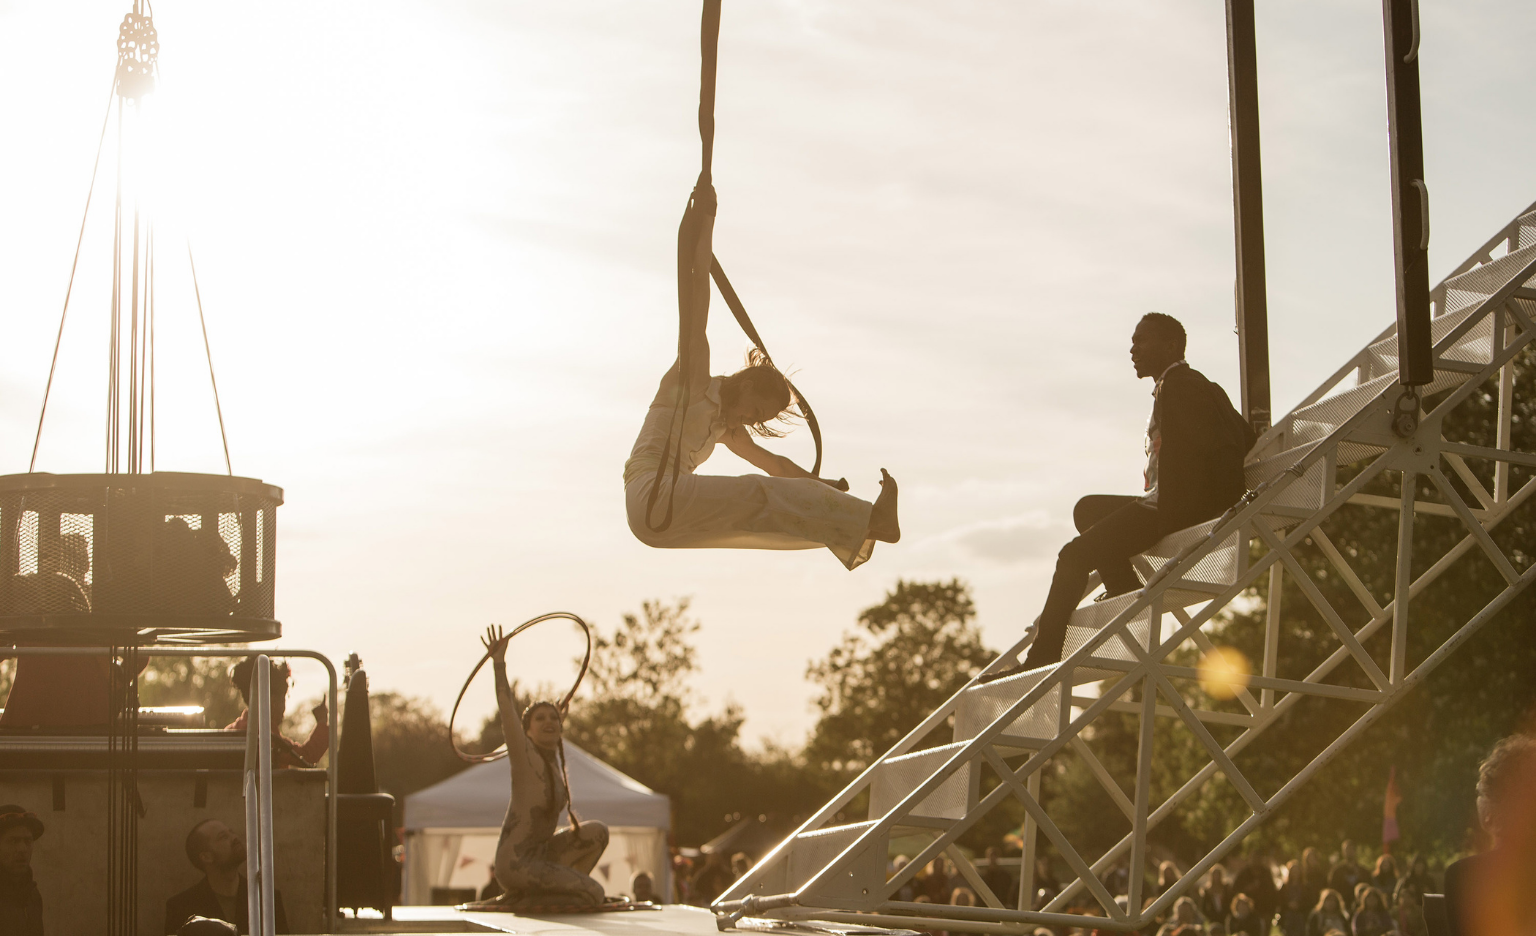 Outdoors settings. The sun burns behind diffuse clouds, making the light soft and warm. Three performers on a stage. The first on is a Black man sitting on metal white stairs. The second one is a white woman sitting with one arm in the air while twirling a hula hoop around a wrist. The third one is a white woman up in the air, holding herself up by holding onto circus straps with one hand. She is bent forward with her legs parallel to the ground.